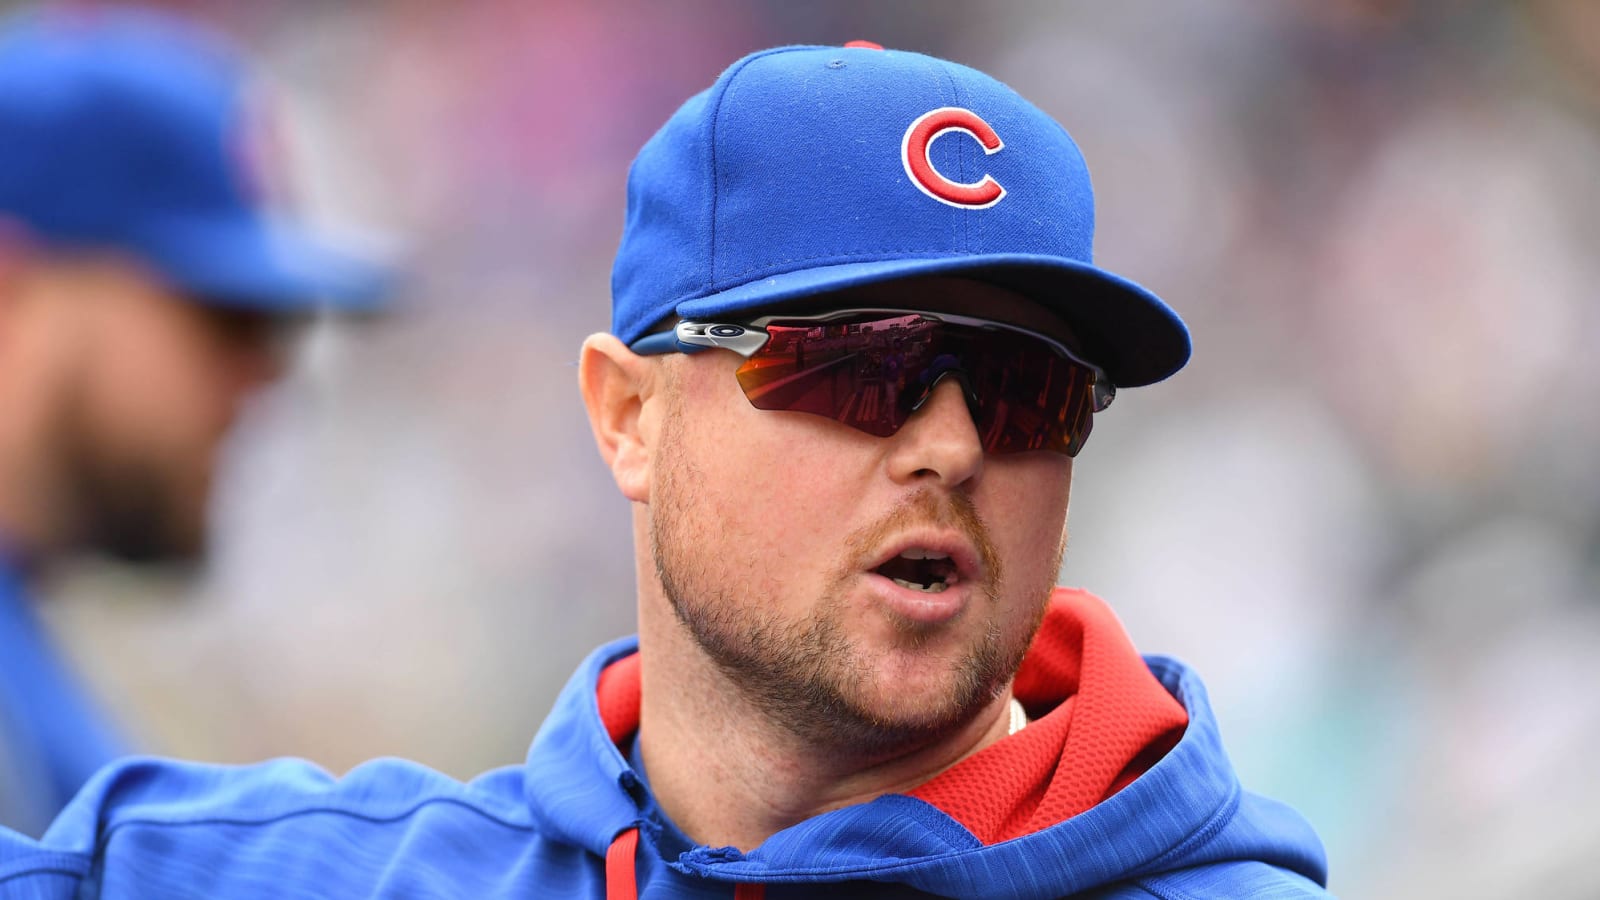 Lester urges young athletes to clean up their Twitter accounts